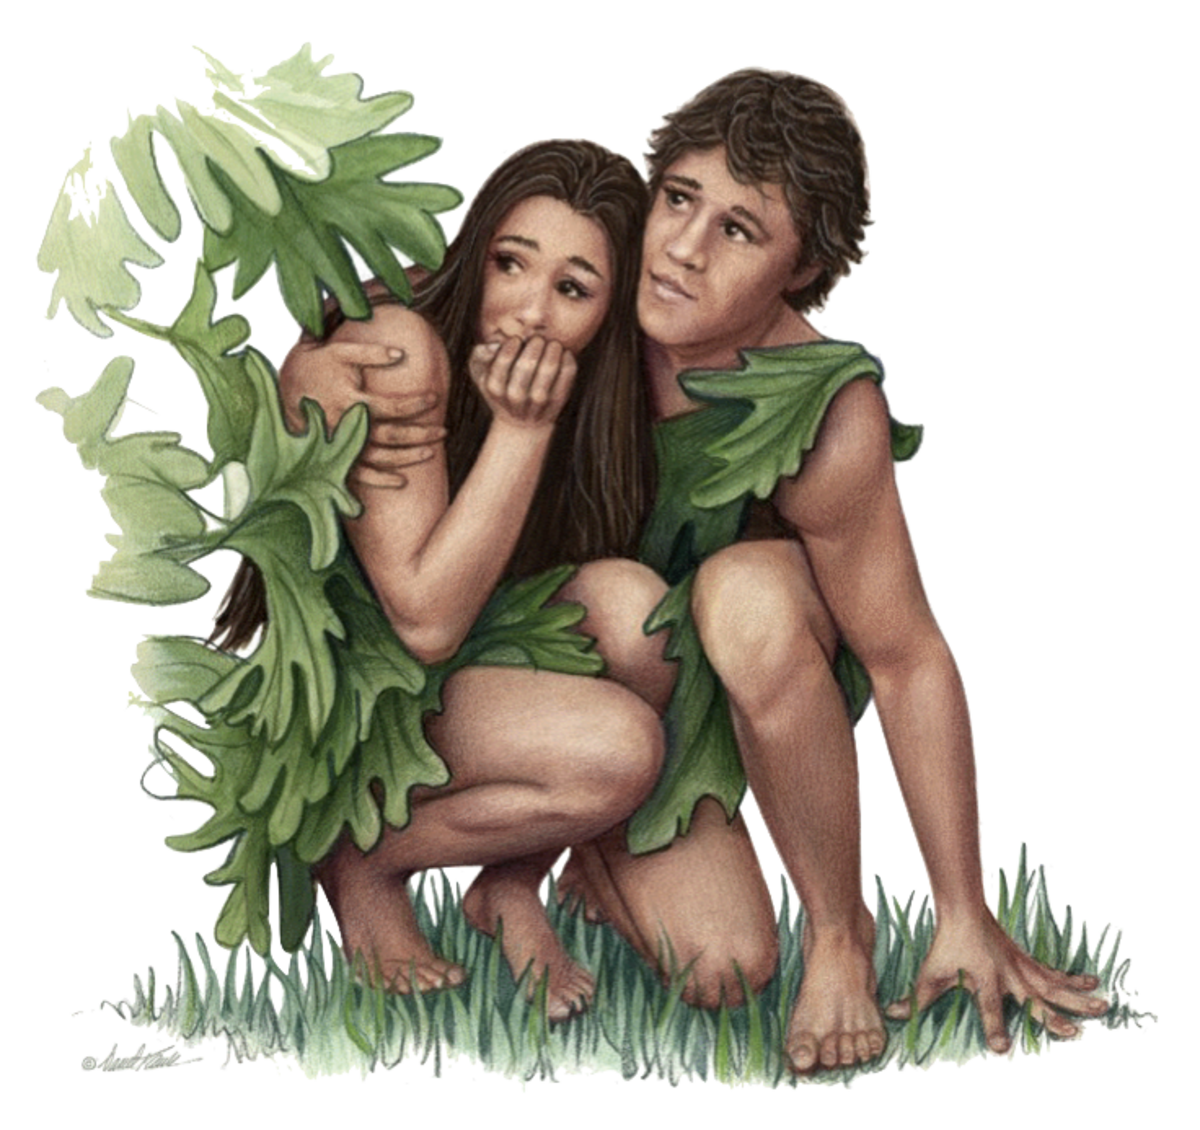 Adam and Eve's decision to disobey was not their fate but their choice.